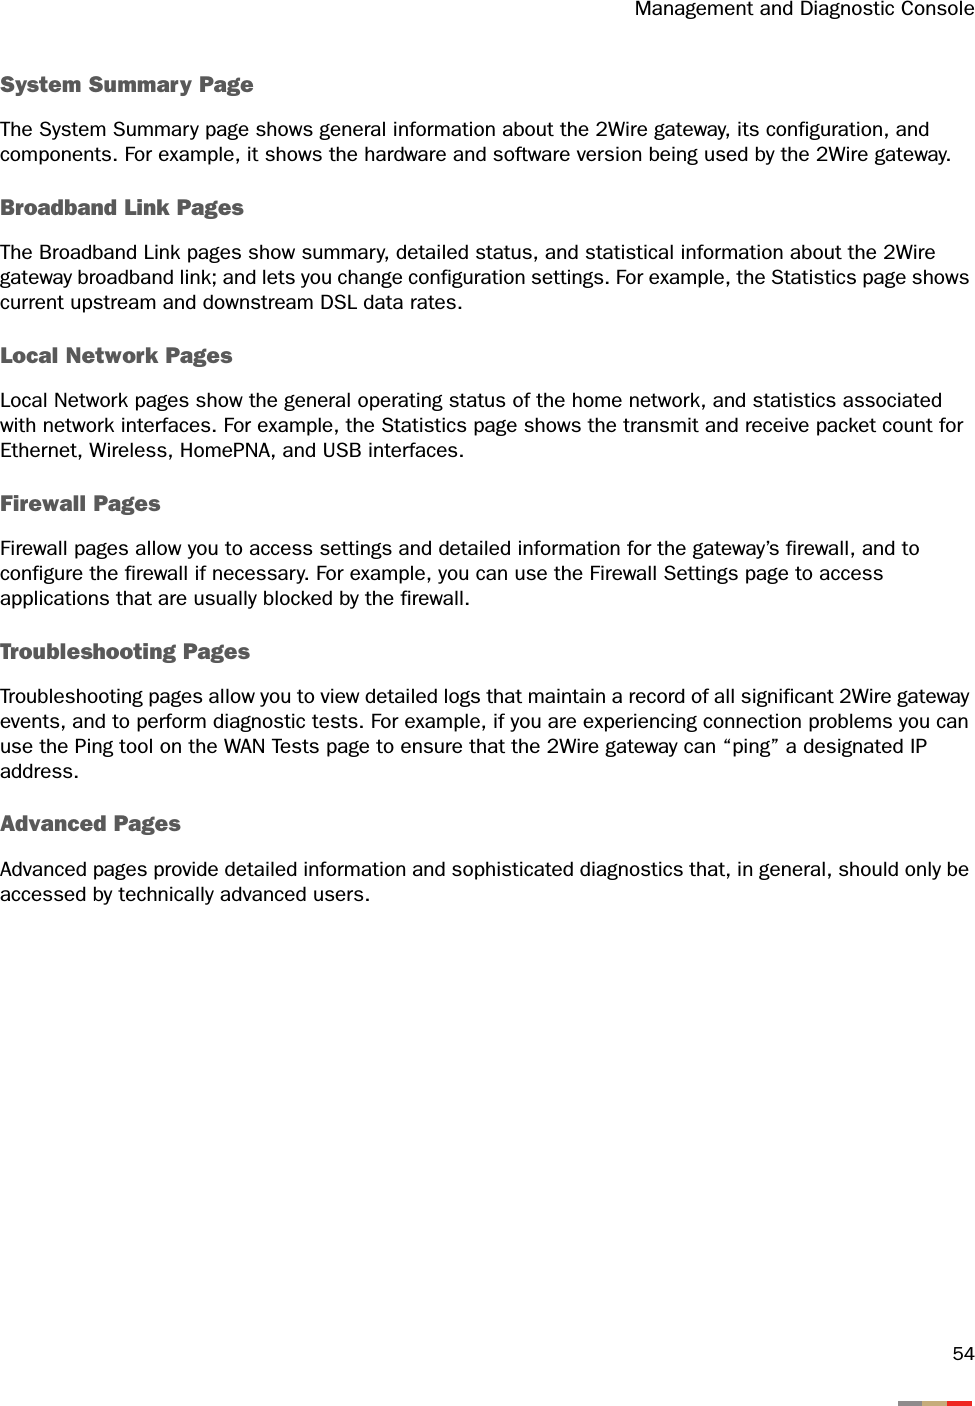 Management and Diagnostic Console54System Summary PageThe System Summary page shows general information about the 2Wire gateway, its configuration, and components. For example, it shows the hardware and software version being used by the 2Wire gateway.Broadband Link PagesThe Broadband Link pages show summary, detailed status, and statistical information about the 2Wire gateway broadband link; and lets you change configuration settings. For example, the Statistics page shows current upstream and downstream DSL data rates.Local Network PagesLocal Network pages show the general operating status of the home network, and statistics associated with network interfaces. For example, the Statistics page shows the transmit and receive packet count for Ethernet, Wireless, HomePNA, and USB interfaces.Firewall PagesFirewall pages allow you to access settings and detailed information for the gateway’s firewall, and to configure the firewall if necessary. For example, you can use the Firewall Settings page to access applications that are usually blocked by the firewall.Troubleshooting PagesTroubleshooting pages allow you to view detailed logs that maintain a record of all significant 2Wire gateway events, and to perform diagnostic tests. For example, if you are experiencing connection problems you can use the Ping tool on the WAN Tests page to ensure that the 2Wire gateway can “ping” a designated IP address.Advanced PagesAdvanced pages provide detailed information and sophisticated diagnostics that, in general, should only be accessed by technically advanced users. 